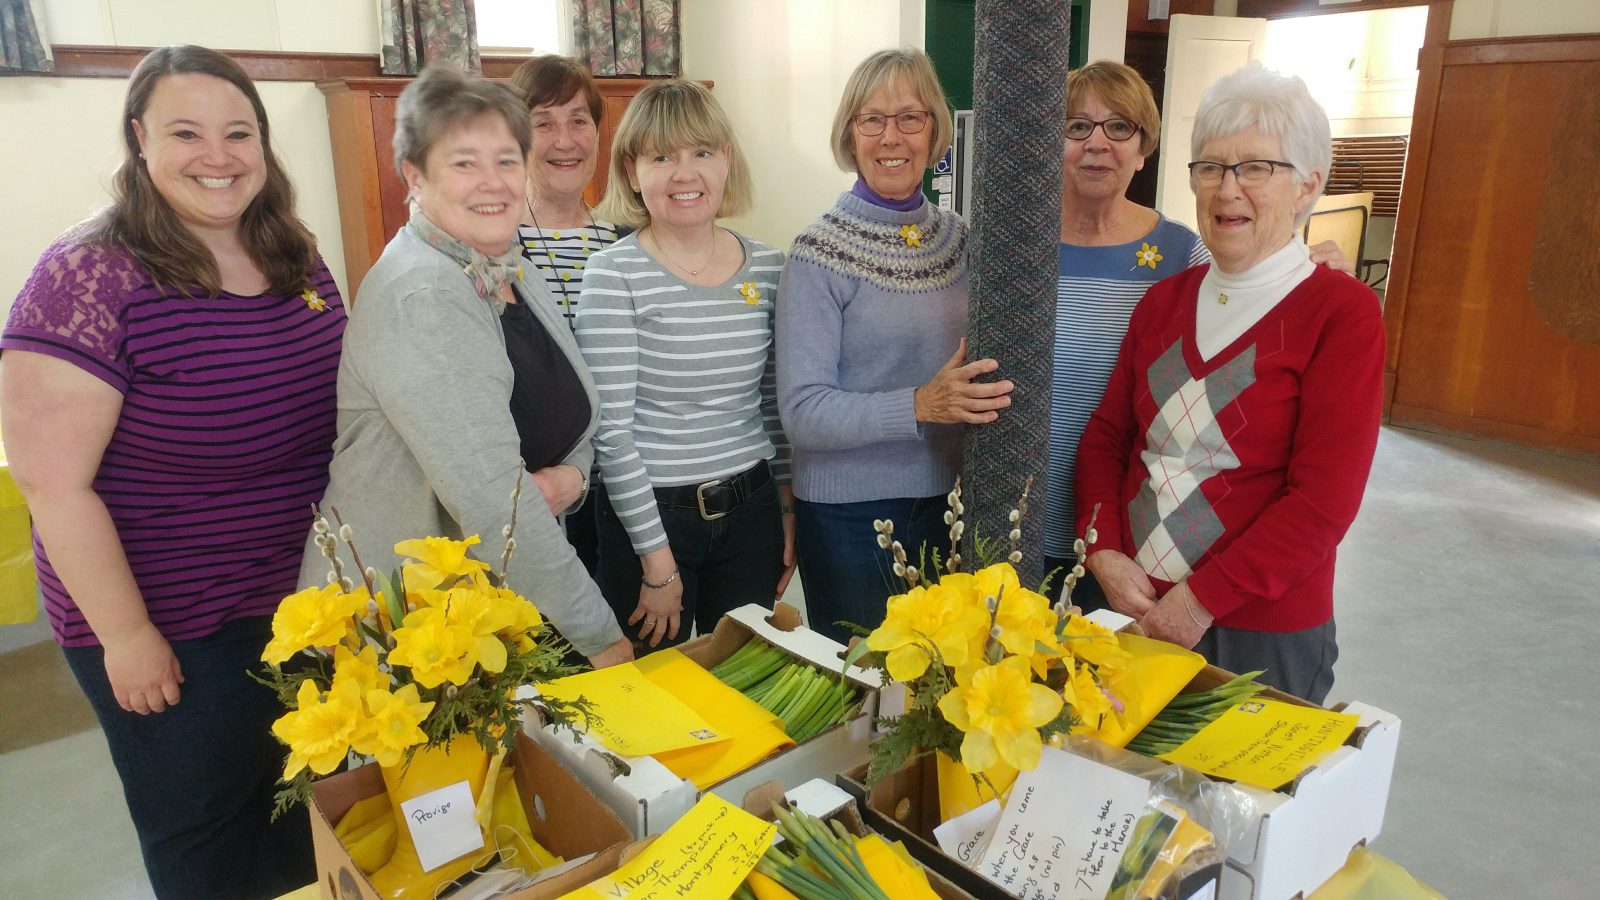 Another successful daffodil campaign